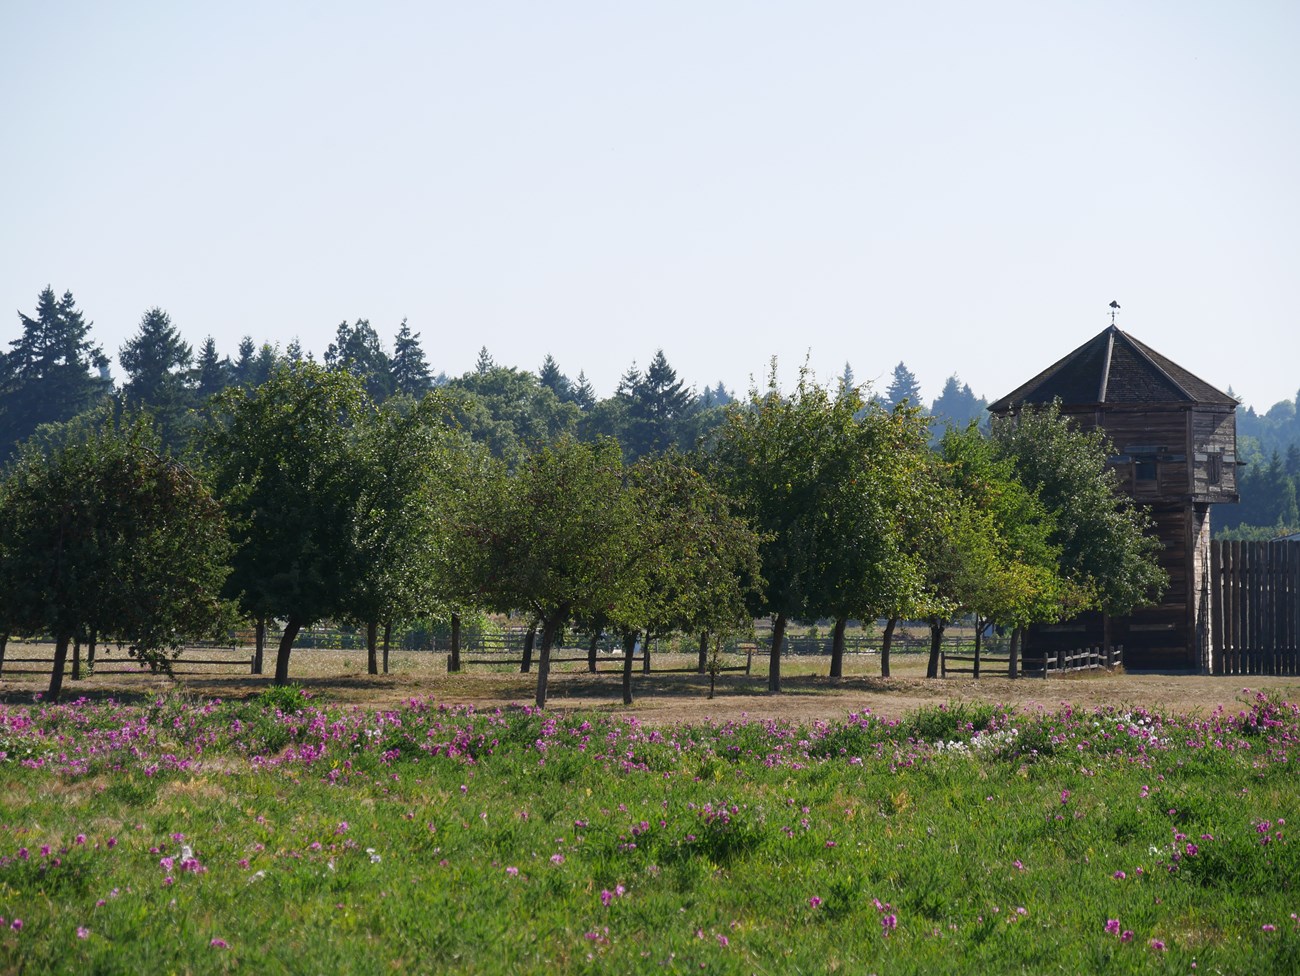 The edge of an apple orchard beside the wooden palisade of a fort, seen from across a grassy field